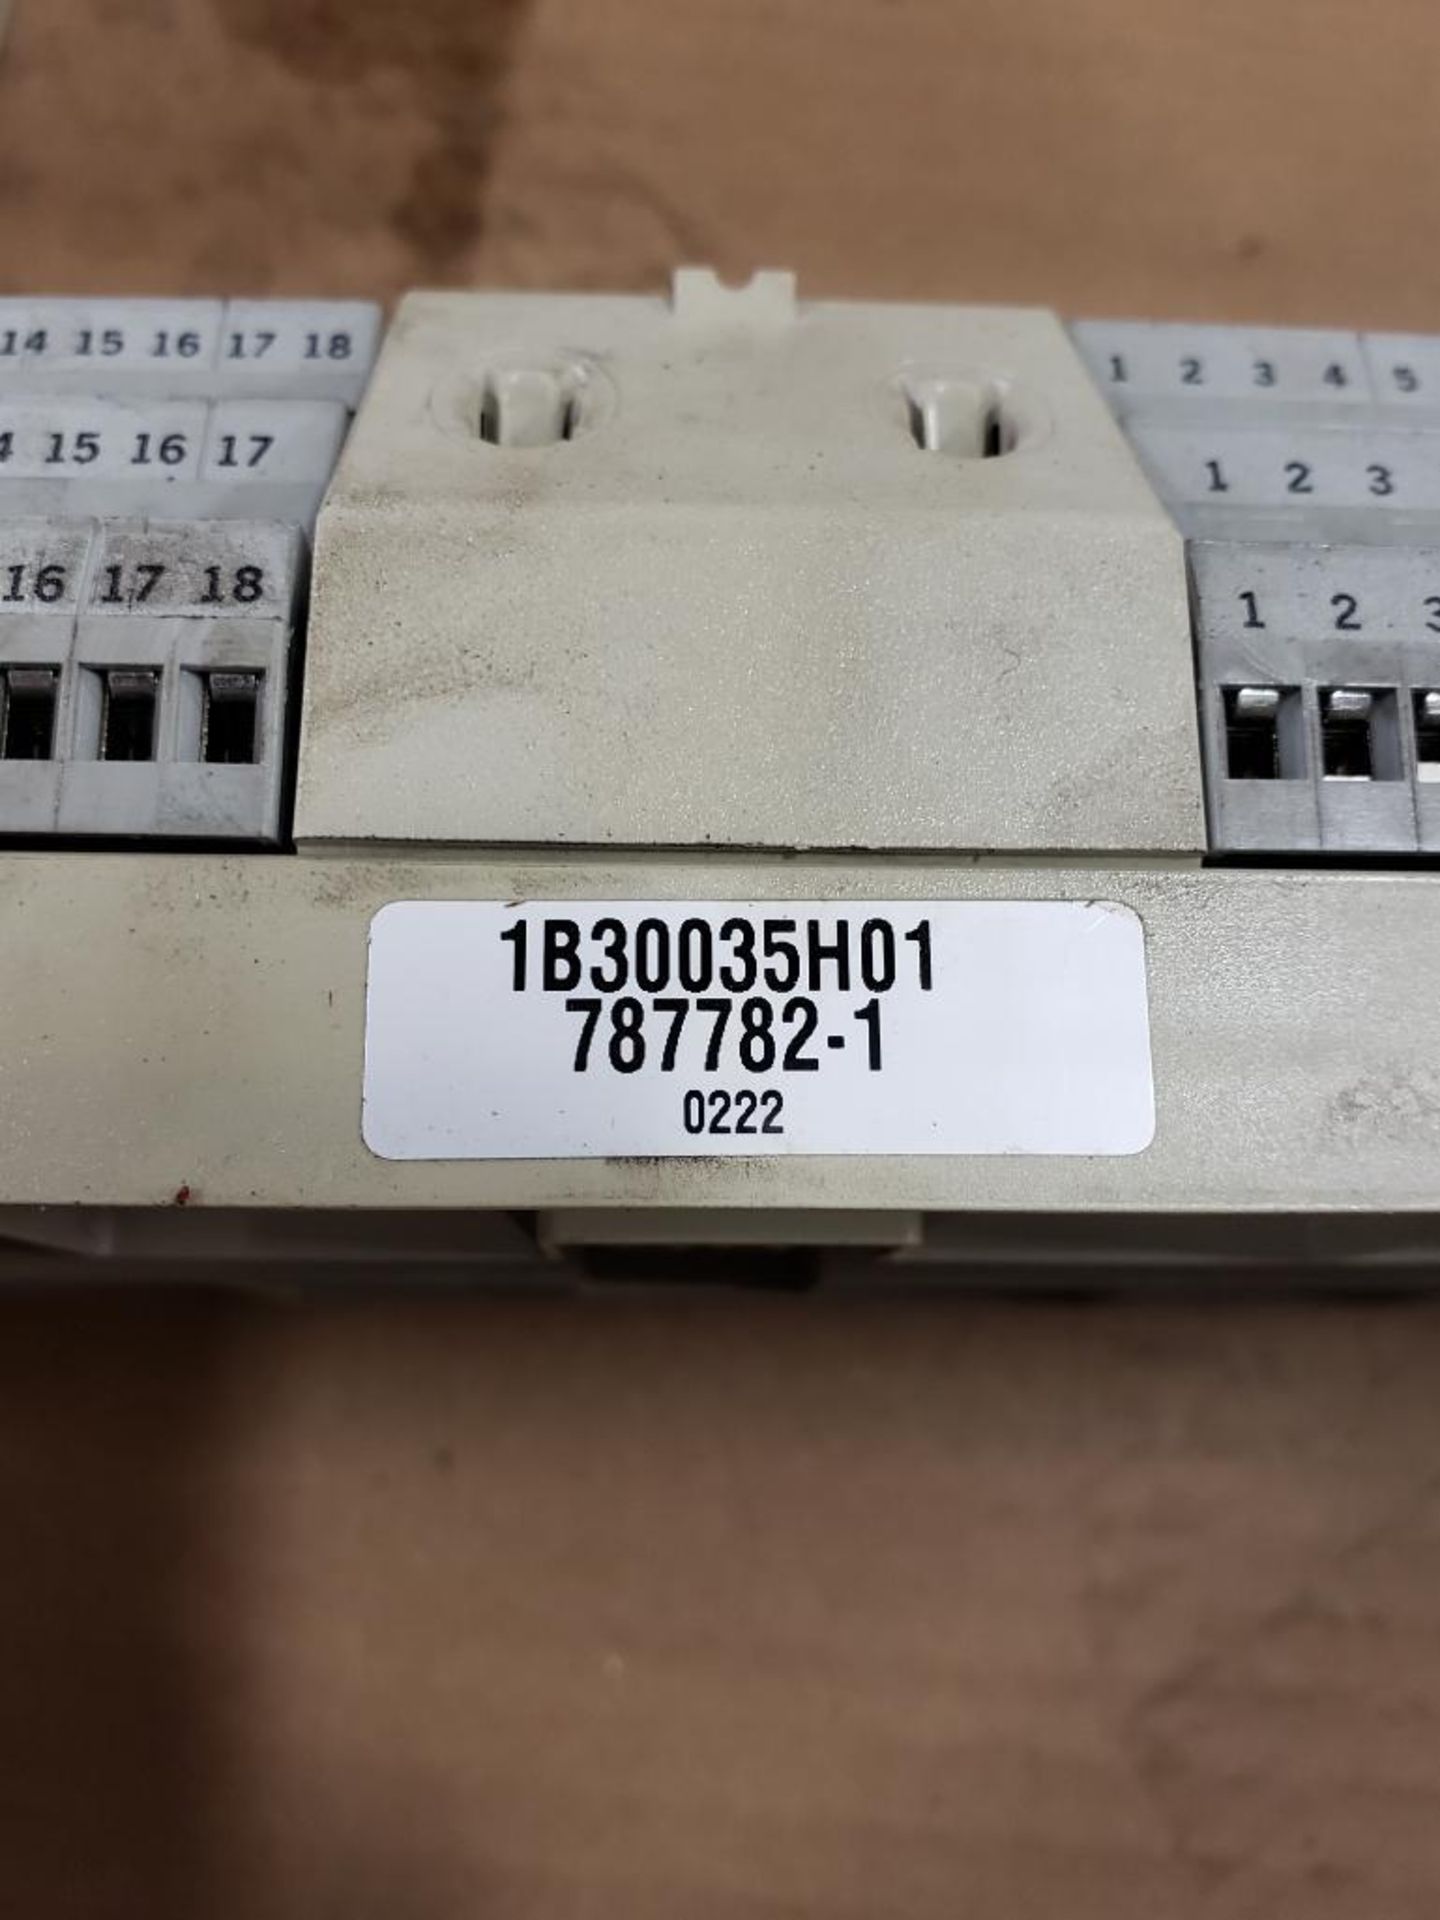 Qty 18 - Emerson Ovation process module. Model number 1B30035H01. - Image 4 of 5